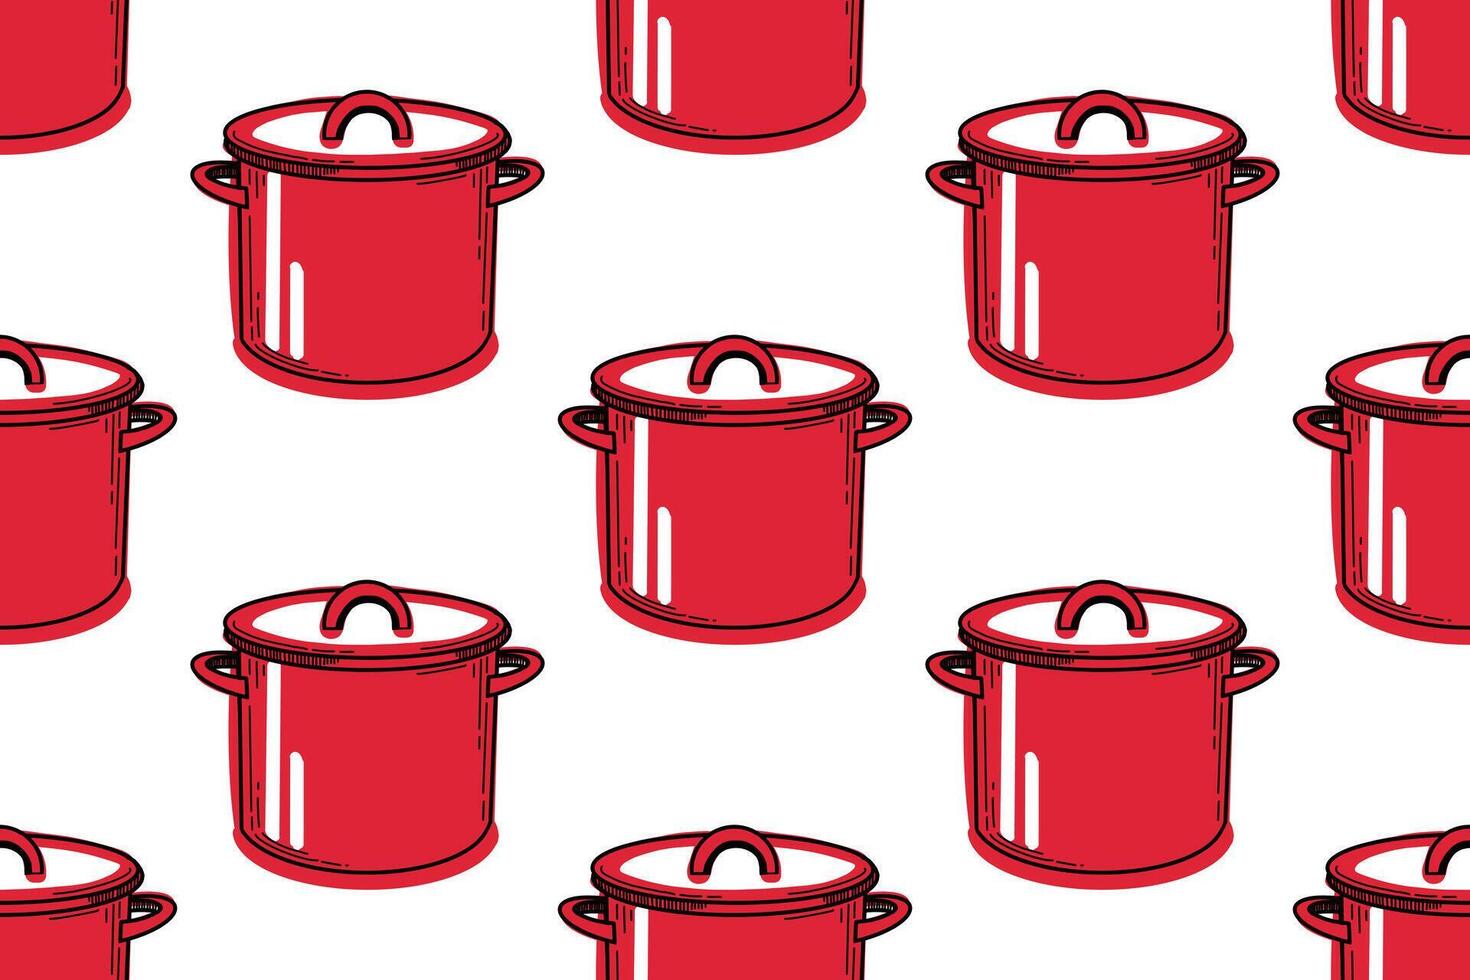 Seamless pattern with kitchen utensils. Red saucepan on a white background. All objects are hand-drawn in in red and black. For printing on fabric, paper, tableware and textile design vector